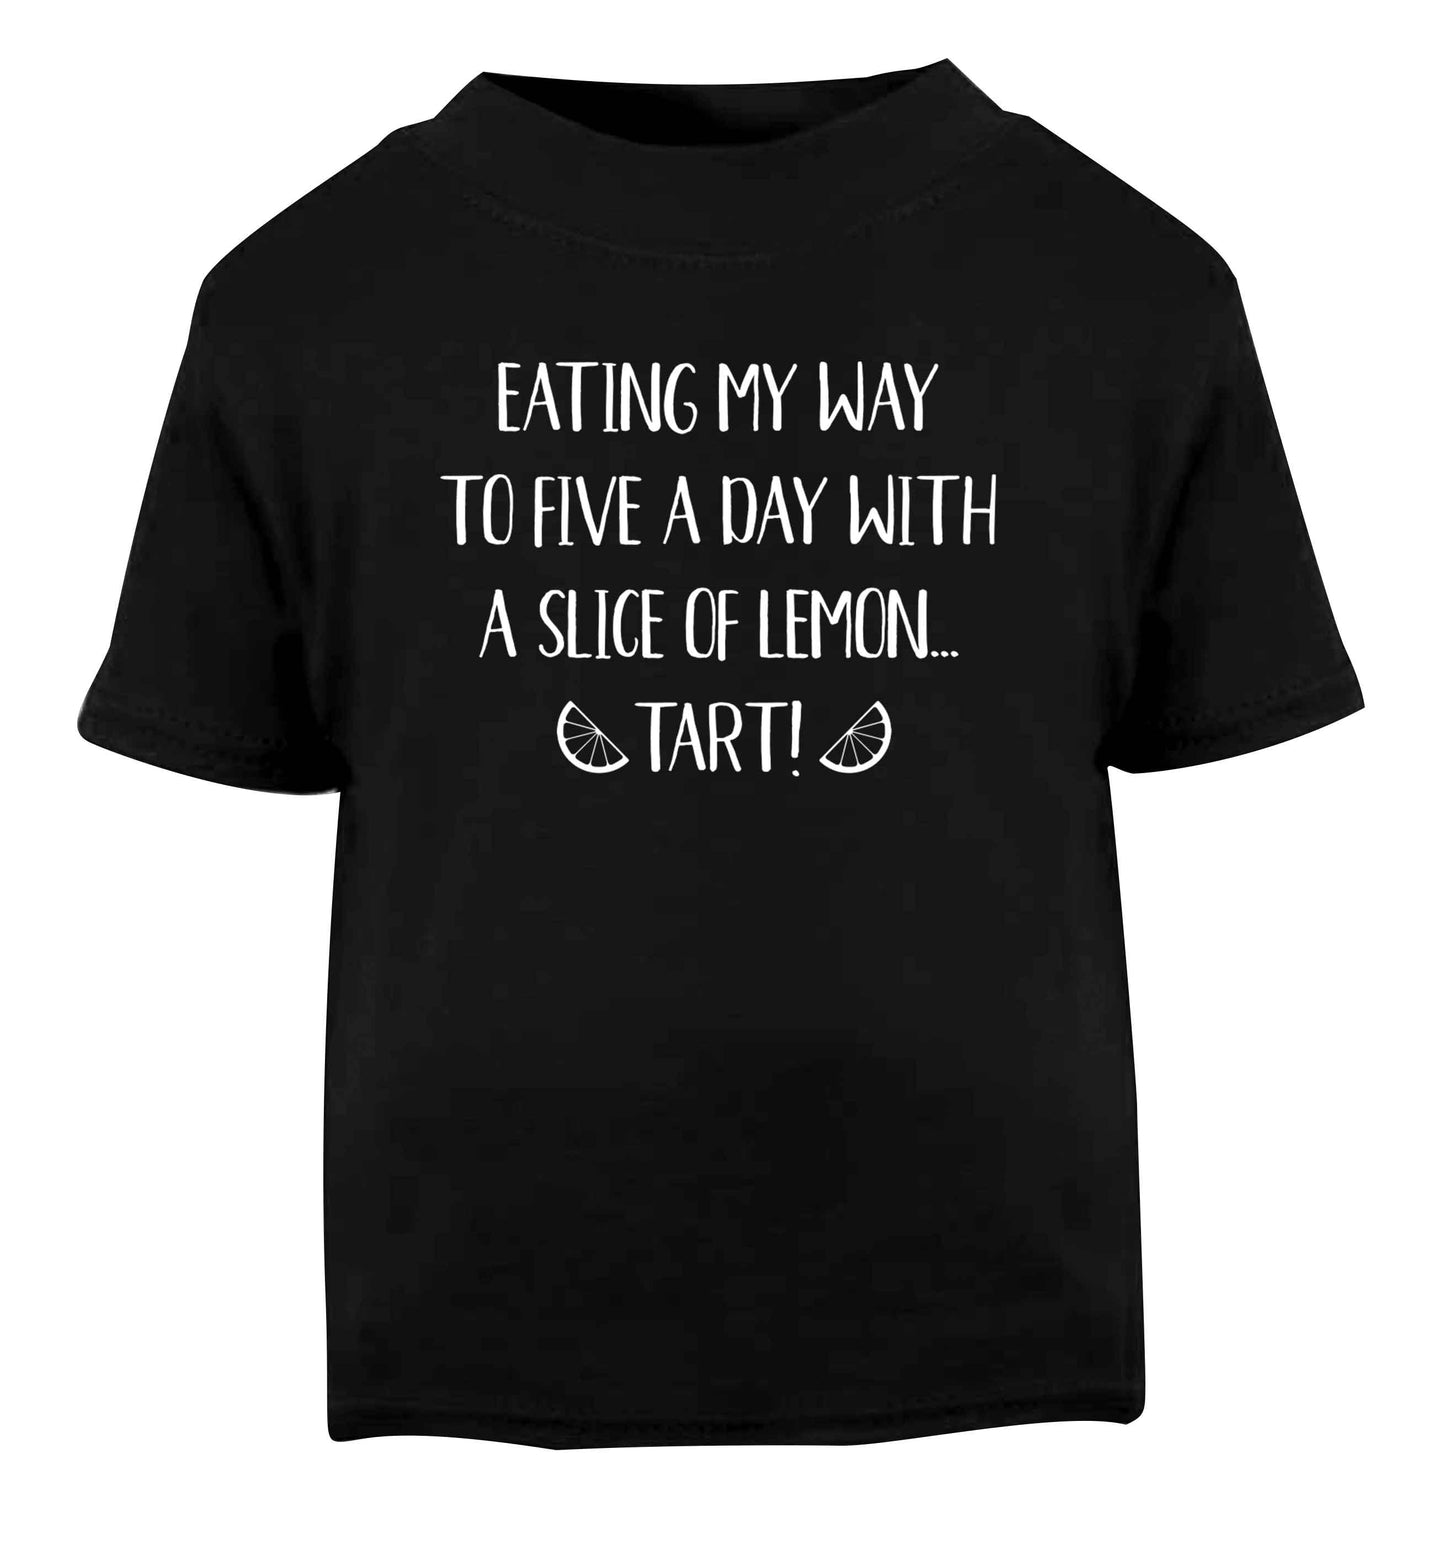 Eating my way to five a day with a slice of lemon tart Black Baby Toddler Tshirt 2 years